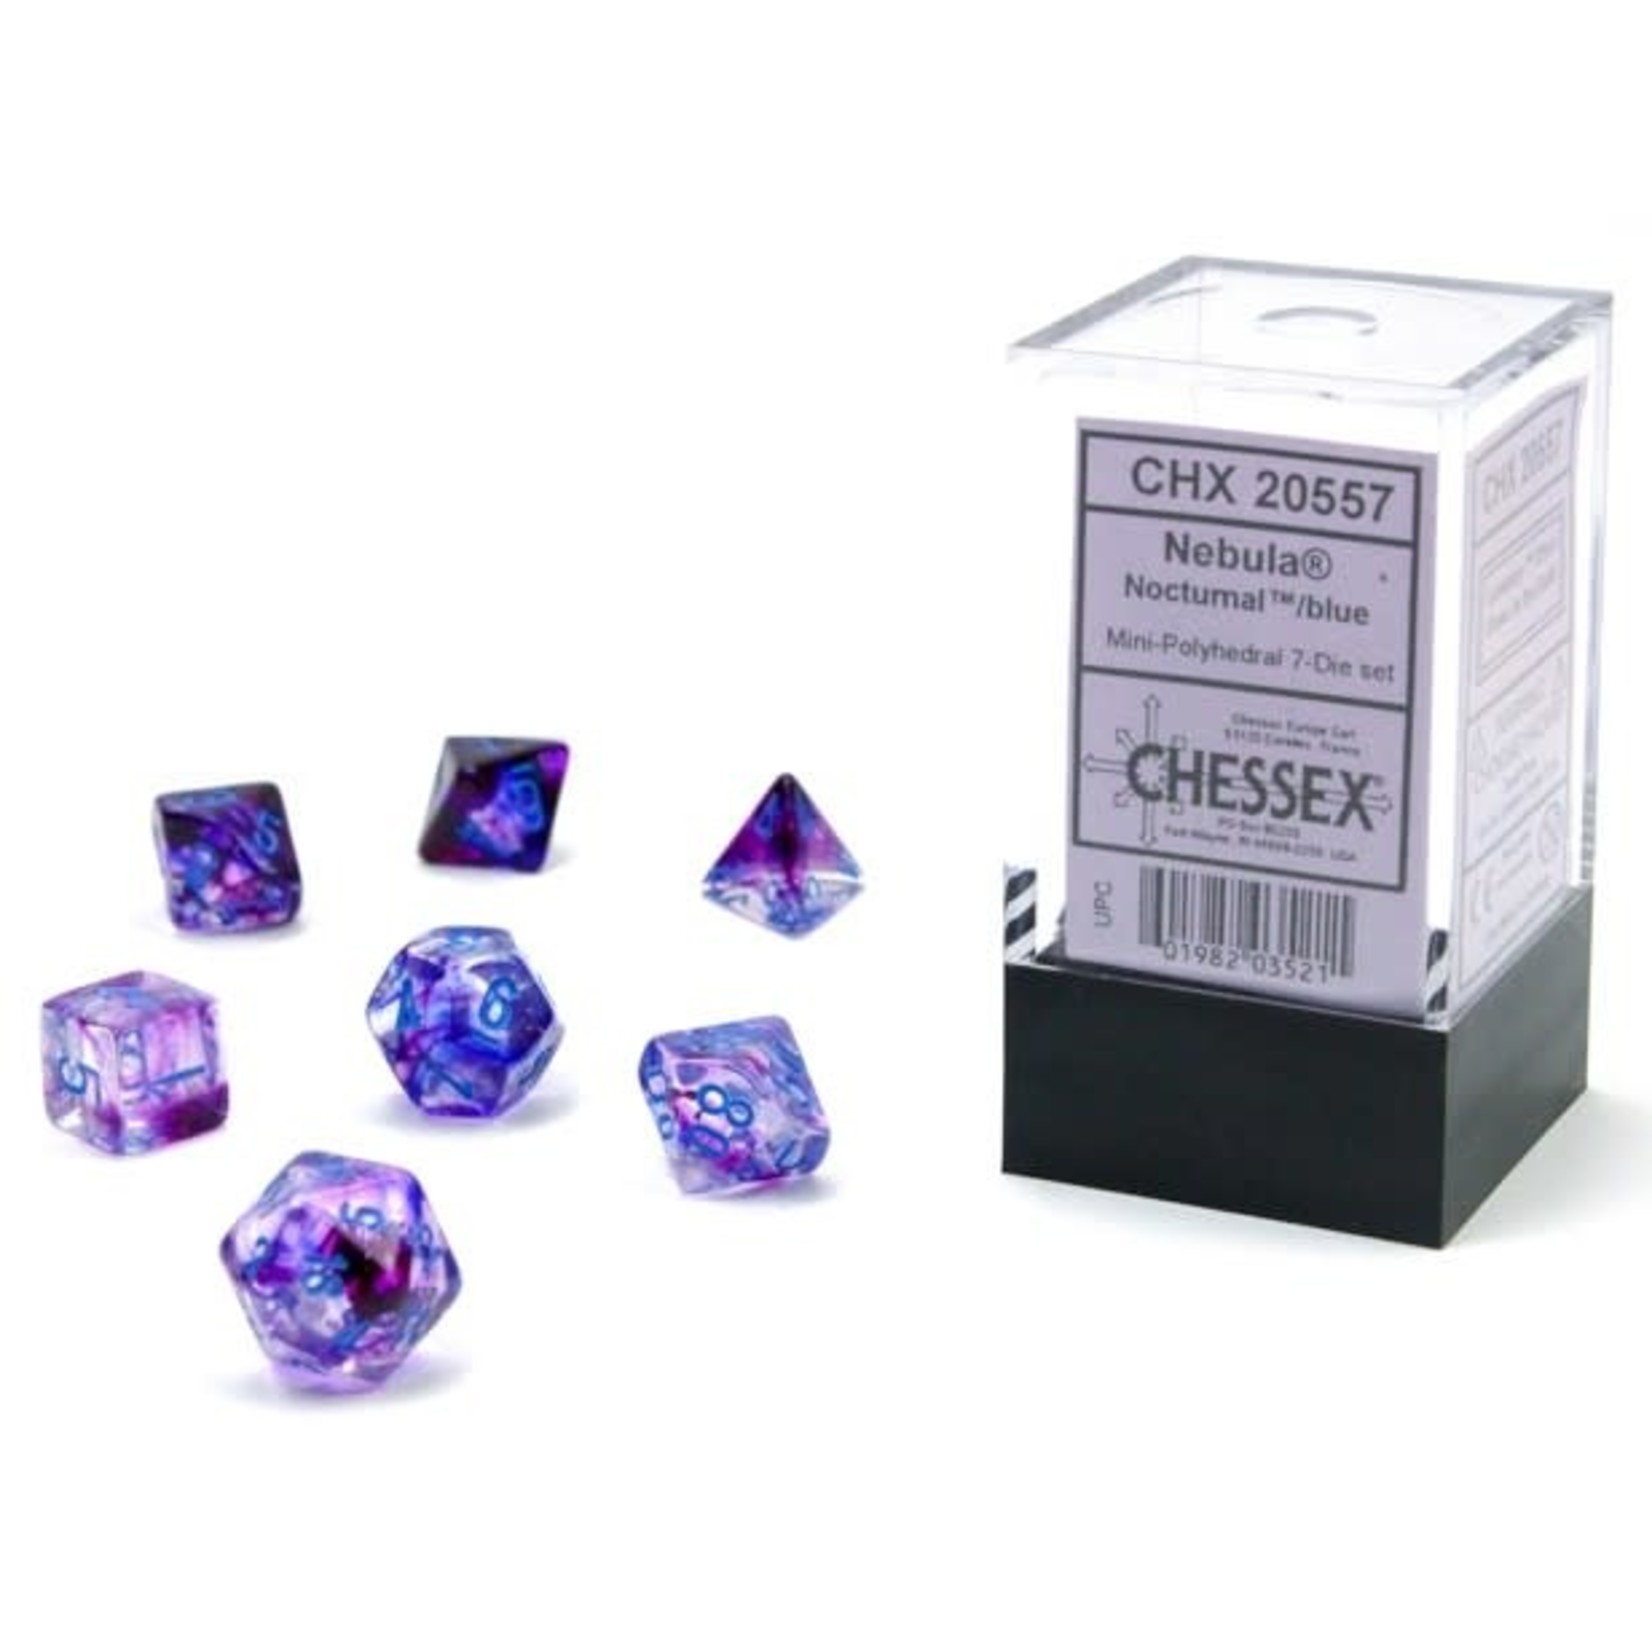 Chessex Chessex Nebula Mini Nocturnal with Blue Luminary Polyhedral 7 die set